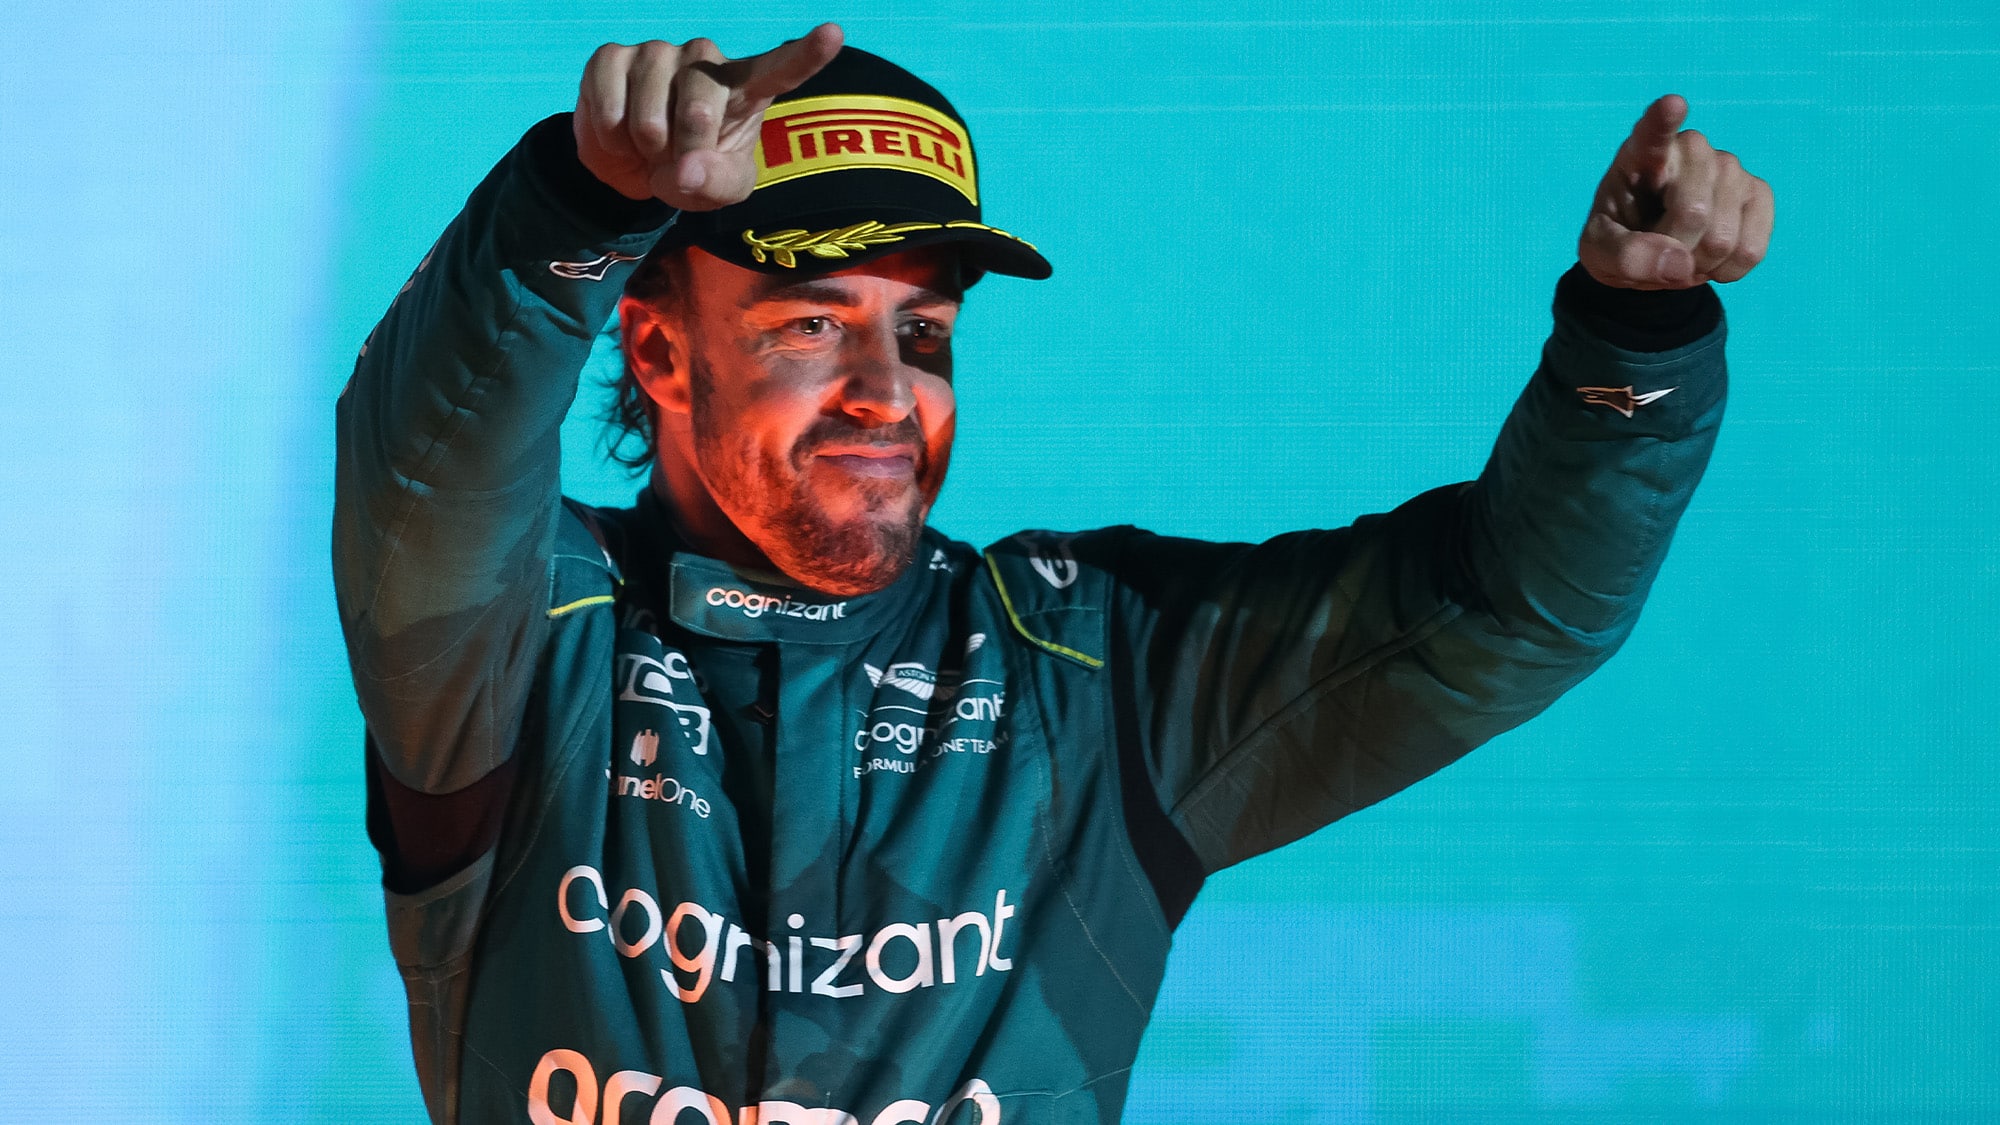 Alonso brings excitement in fight to podium as Verstappen wins Bahrain